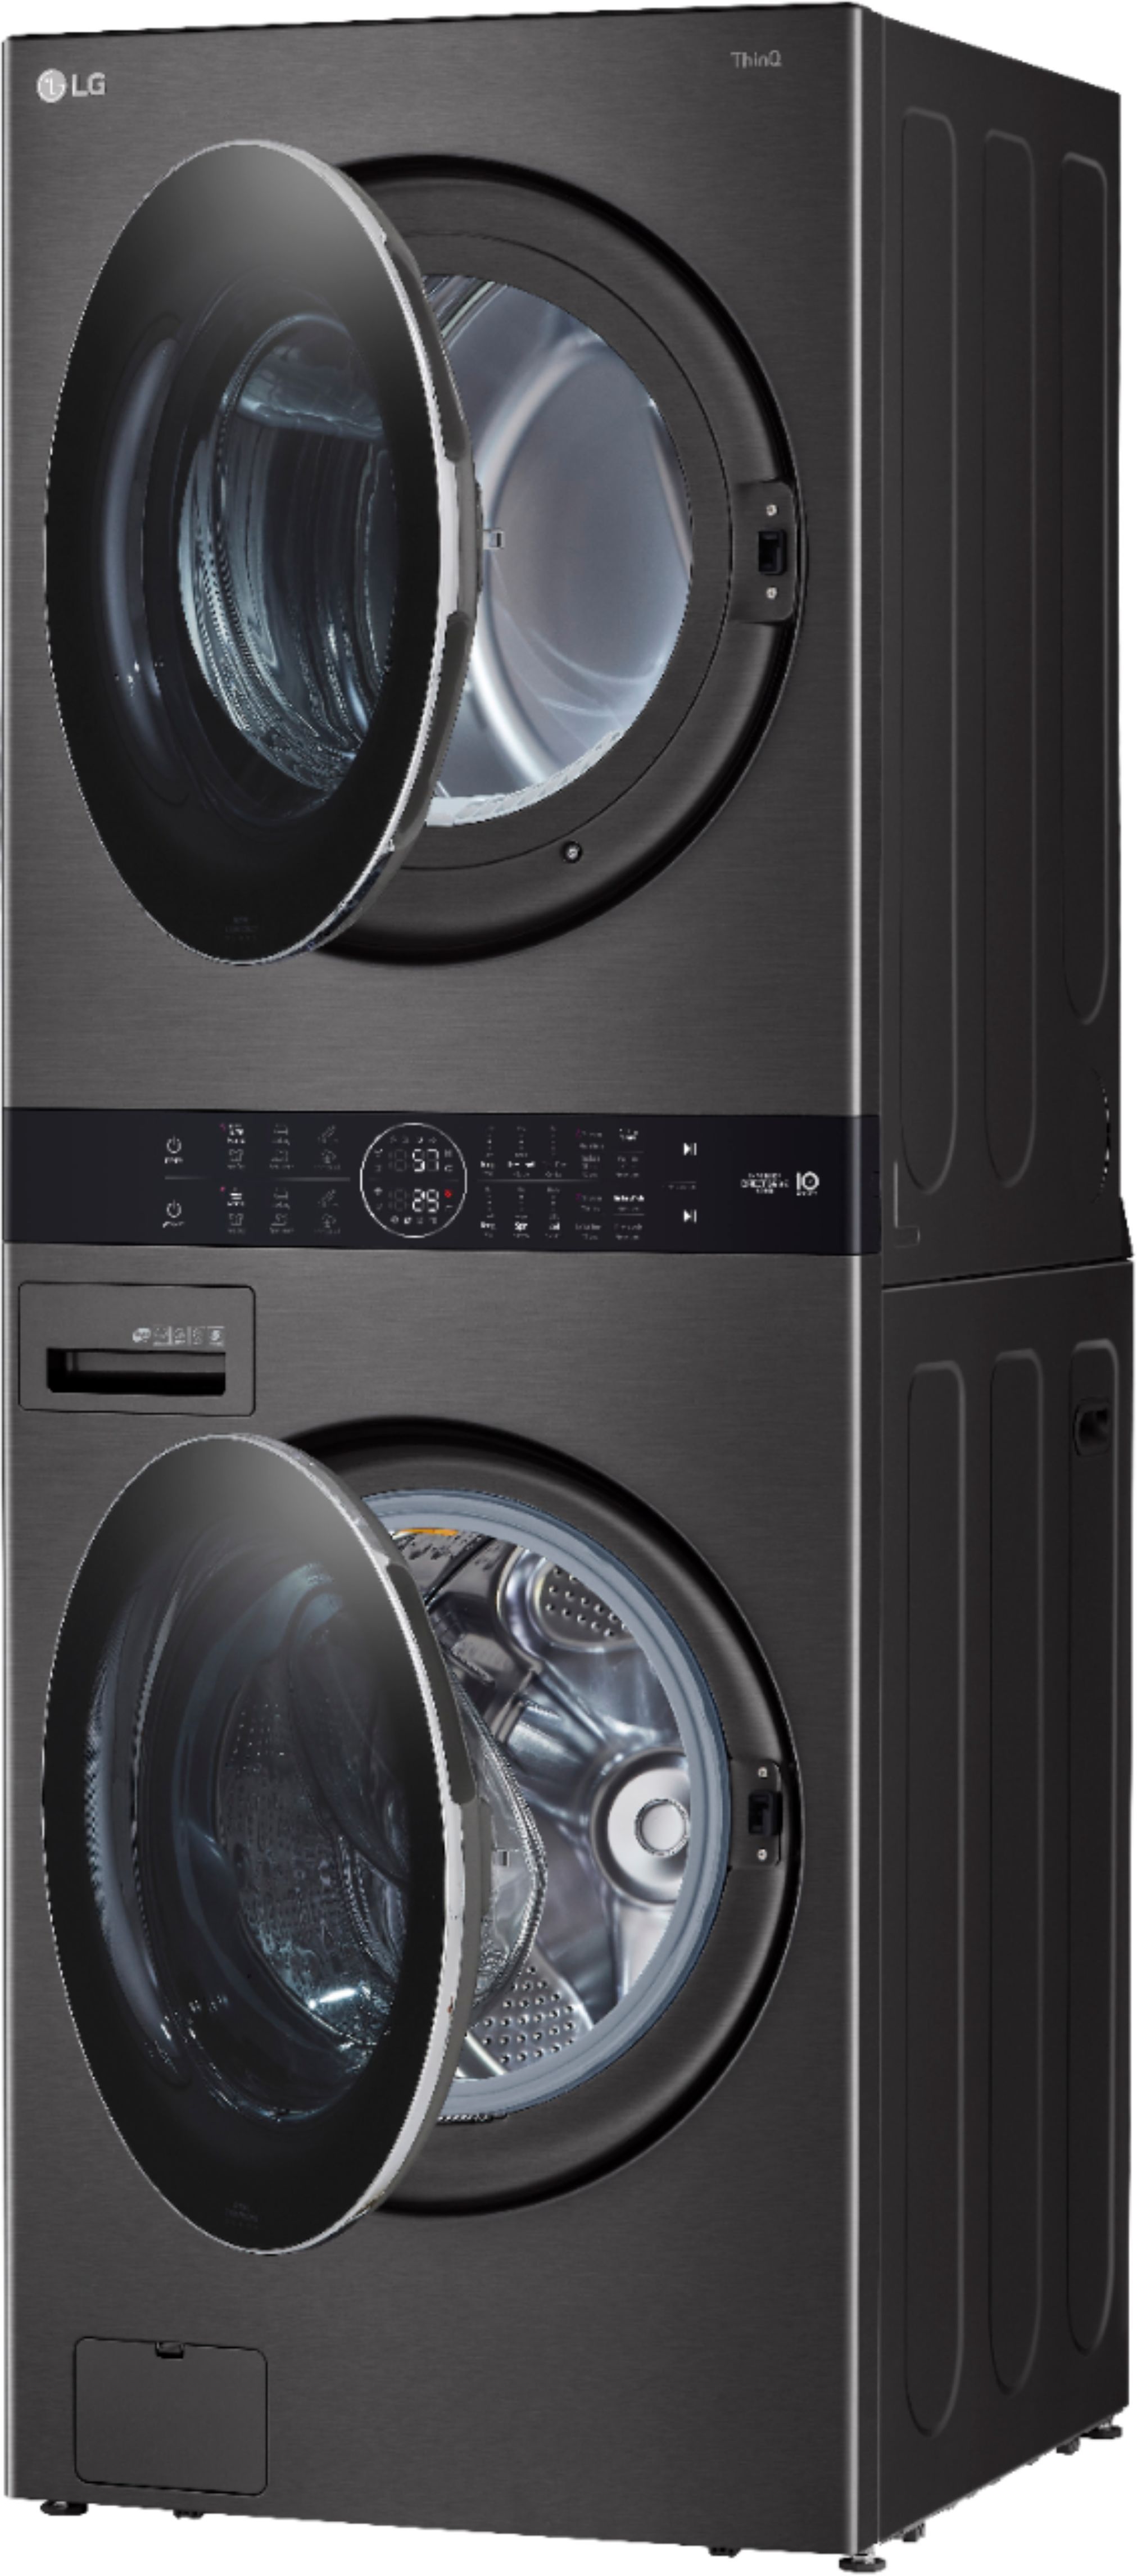 LG 4.5 Cu. Ft. HE Smart Front Load Washer and 7.4 Cu. Ft. Electric Dryer  WashTower with Steam and Built-In Intelligence Black Steel WKEX200HBA -  Best Buy